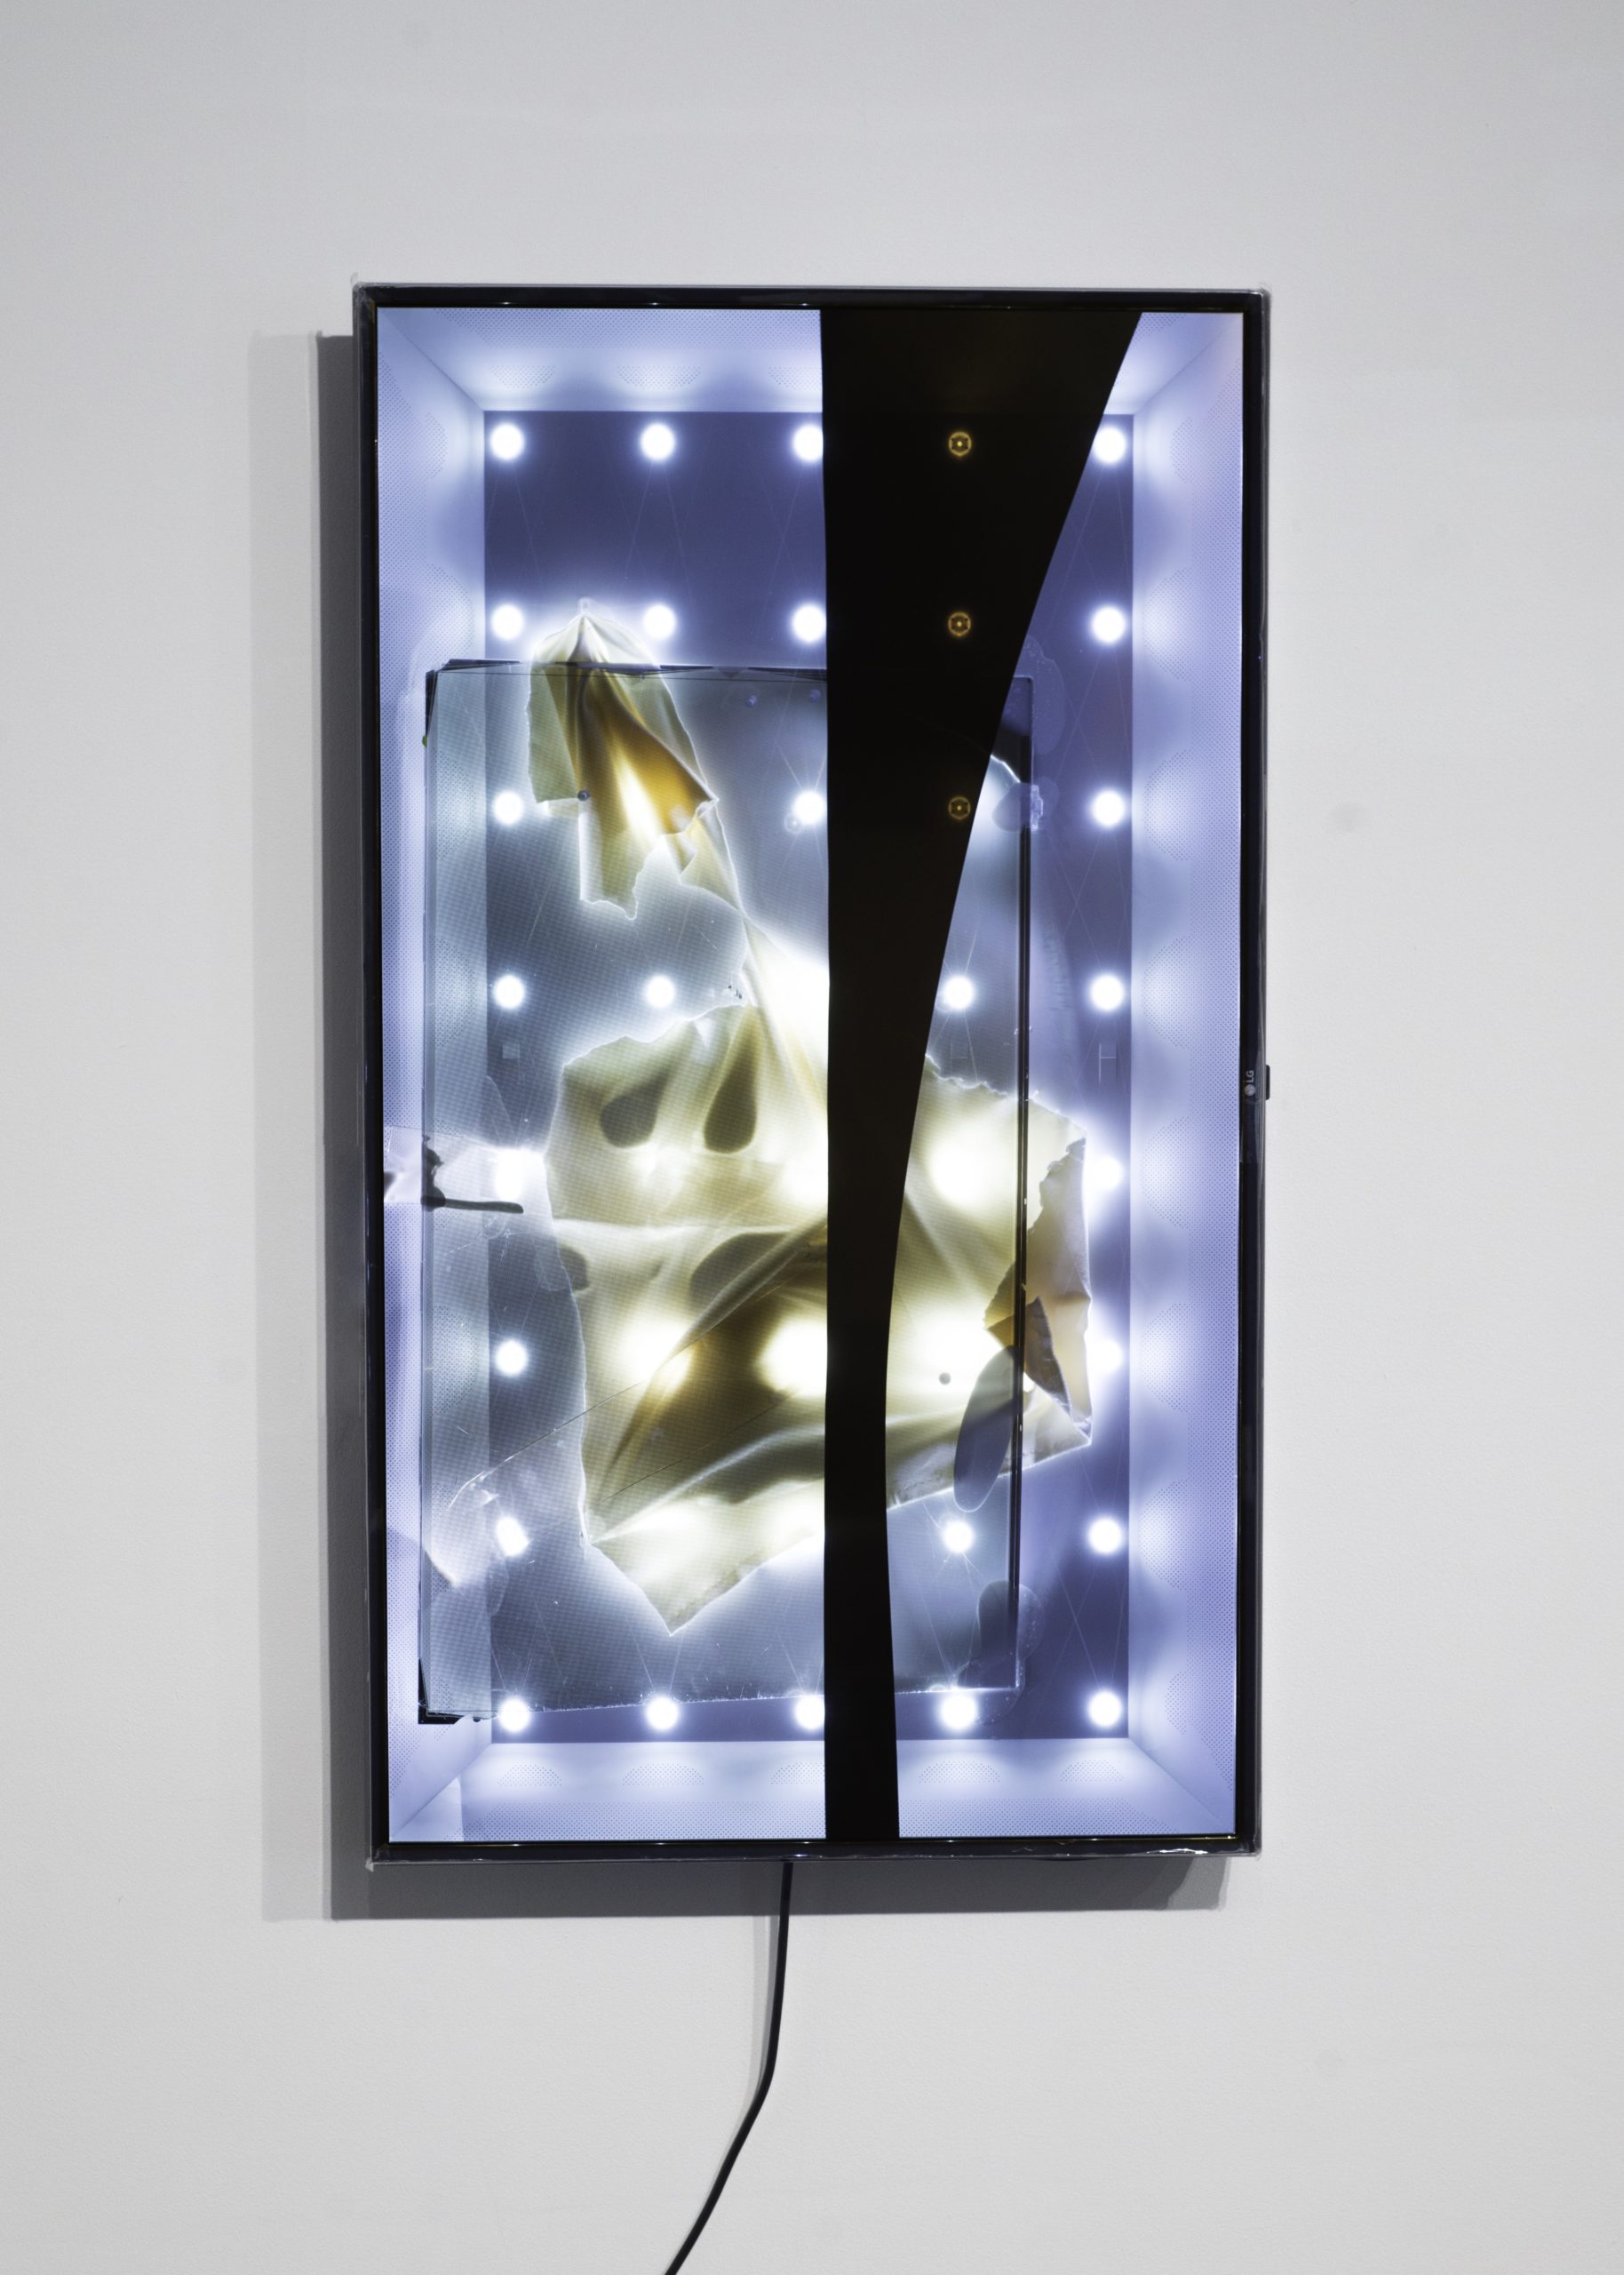 Light filters were peeled from a TV's screen to expose an interior space which the artist fills with found object collage, as an animated video plays on the transparent glass.